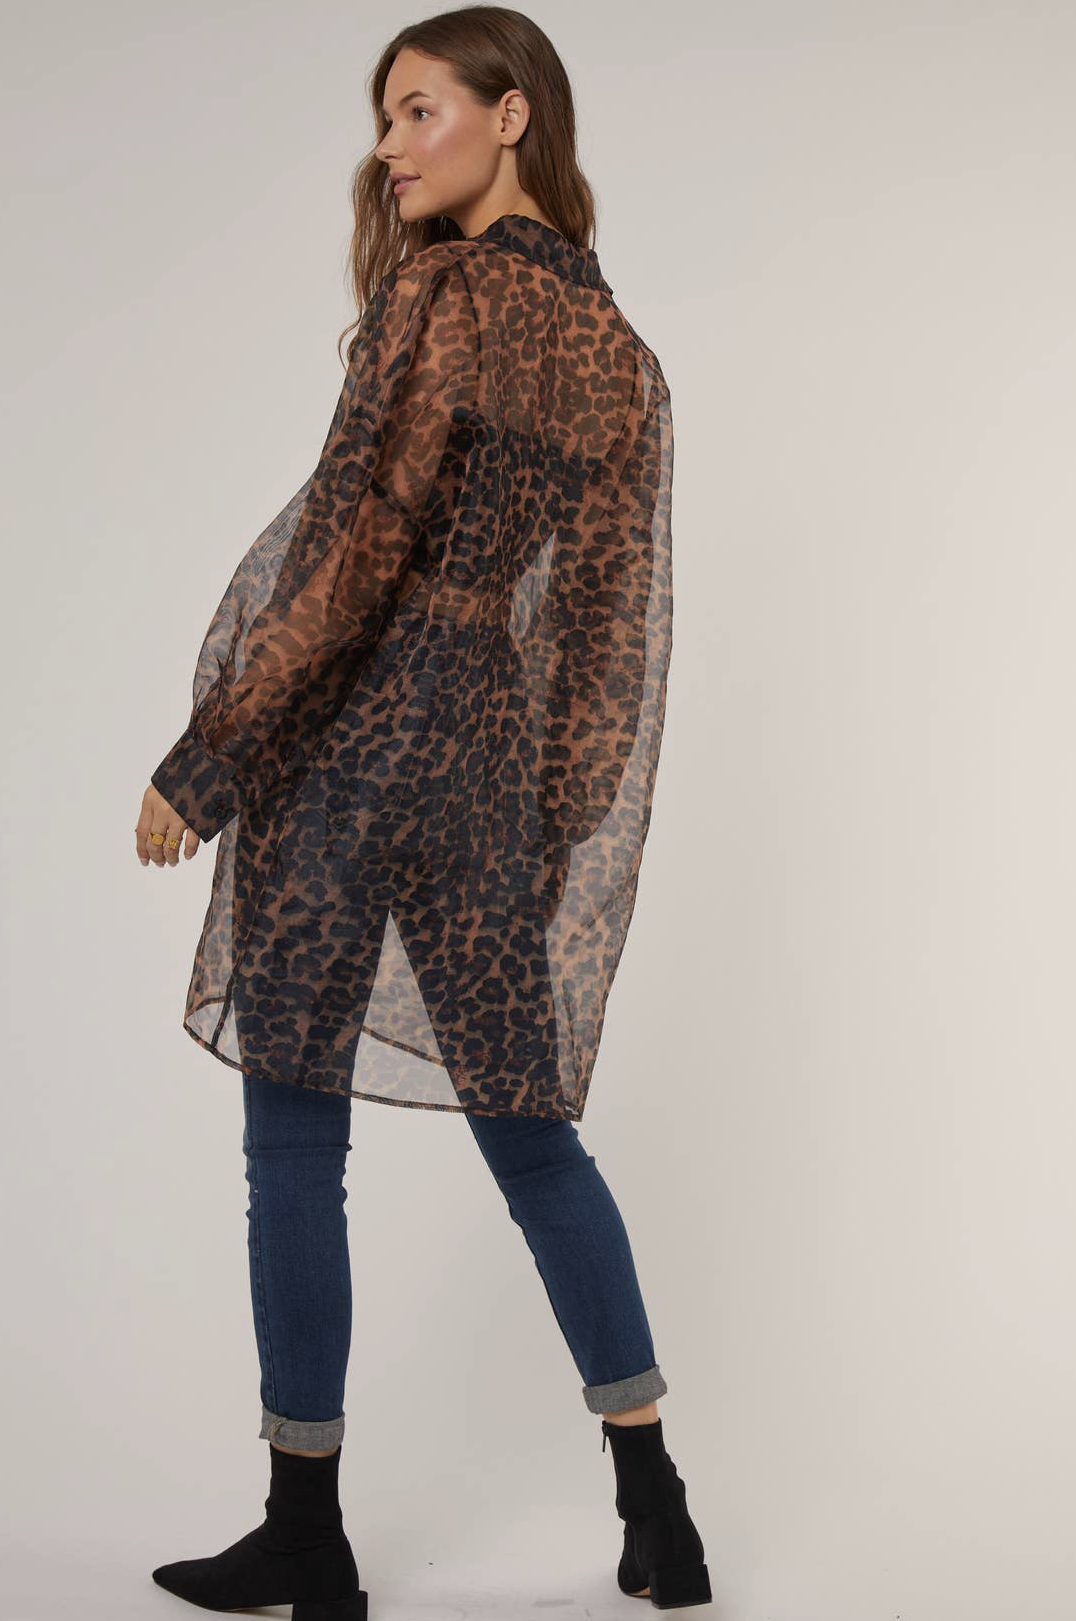 Stacie oversized leopard print long organza button up top